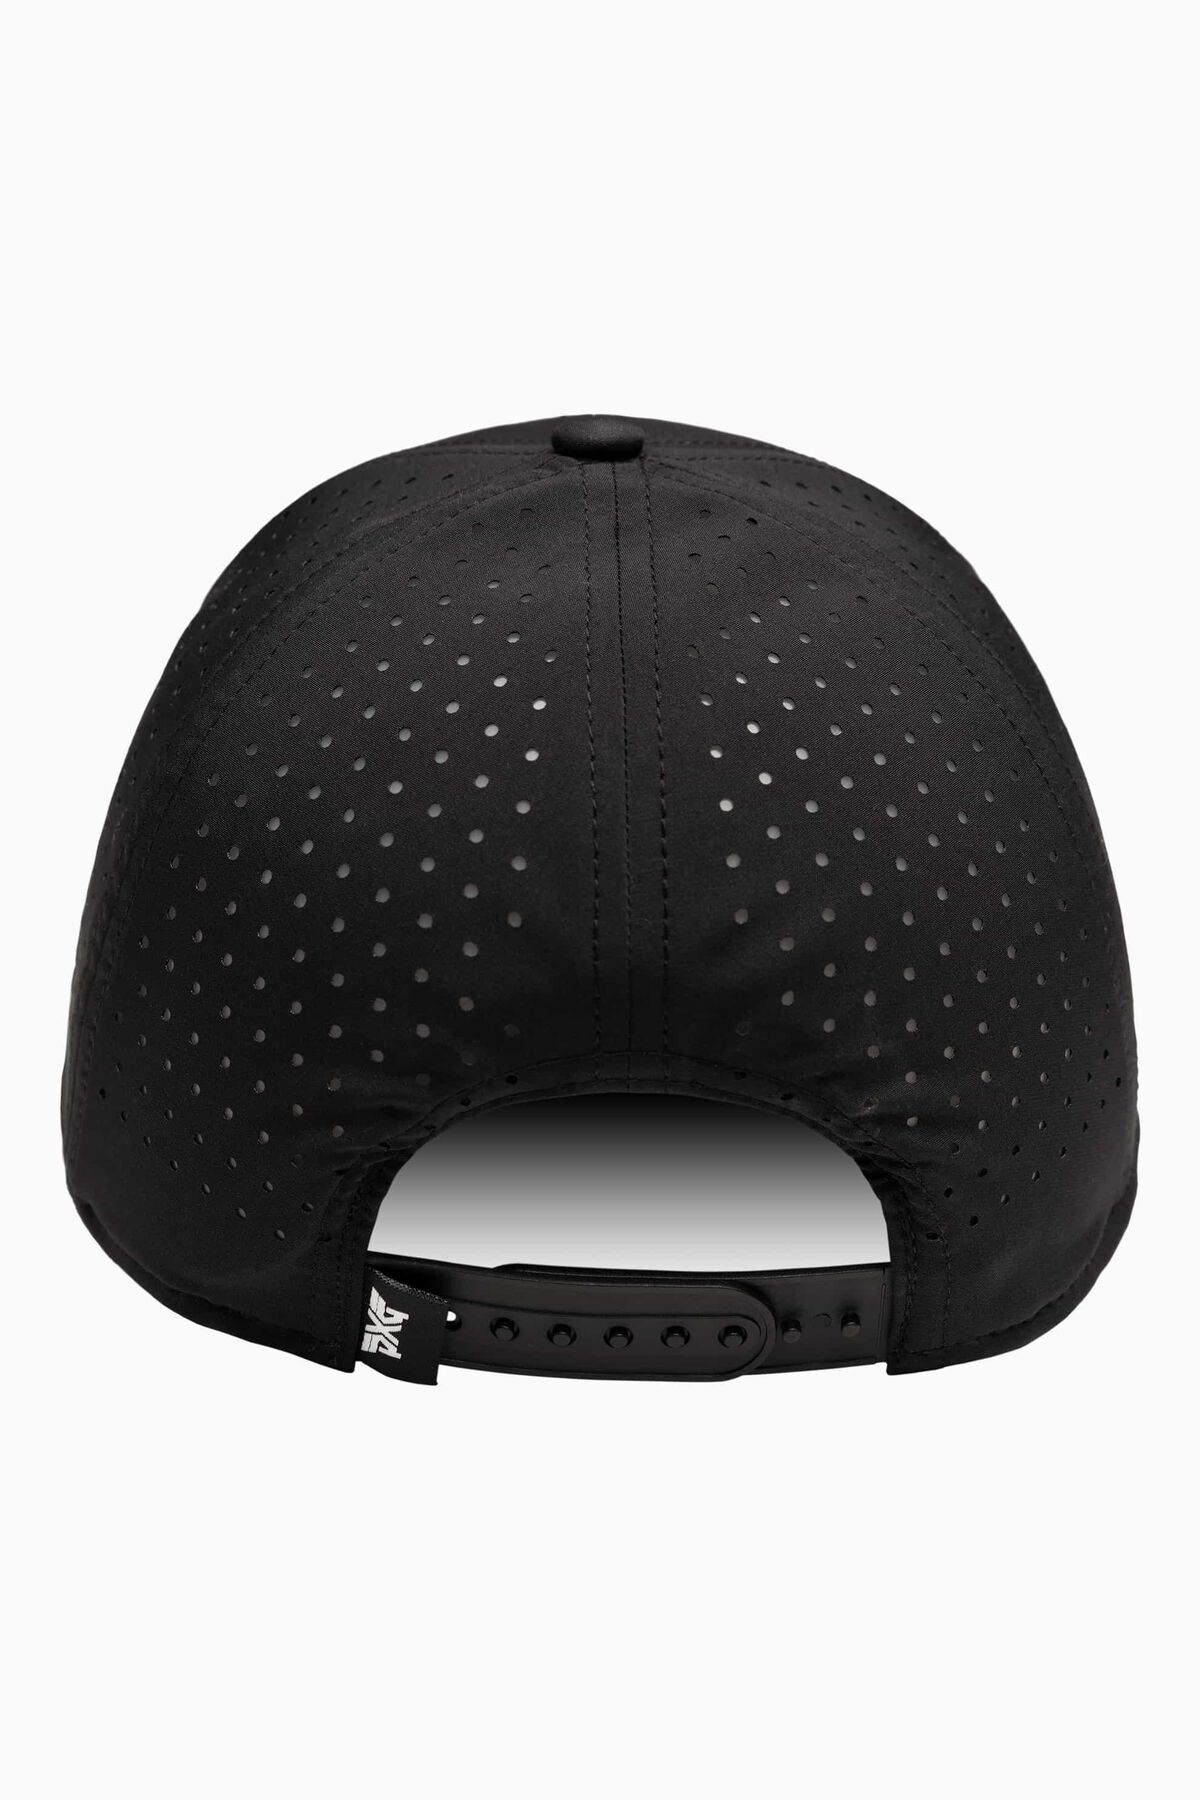 Buy Faceted Large 6 Panel PXG Curved Structured Bill Cap 